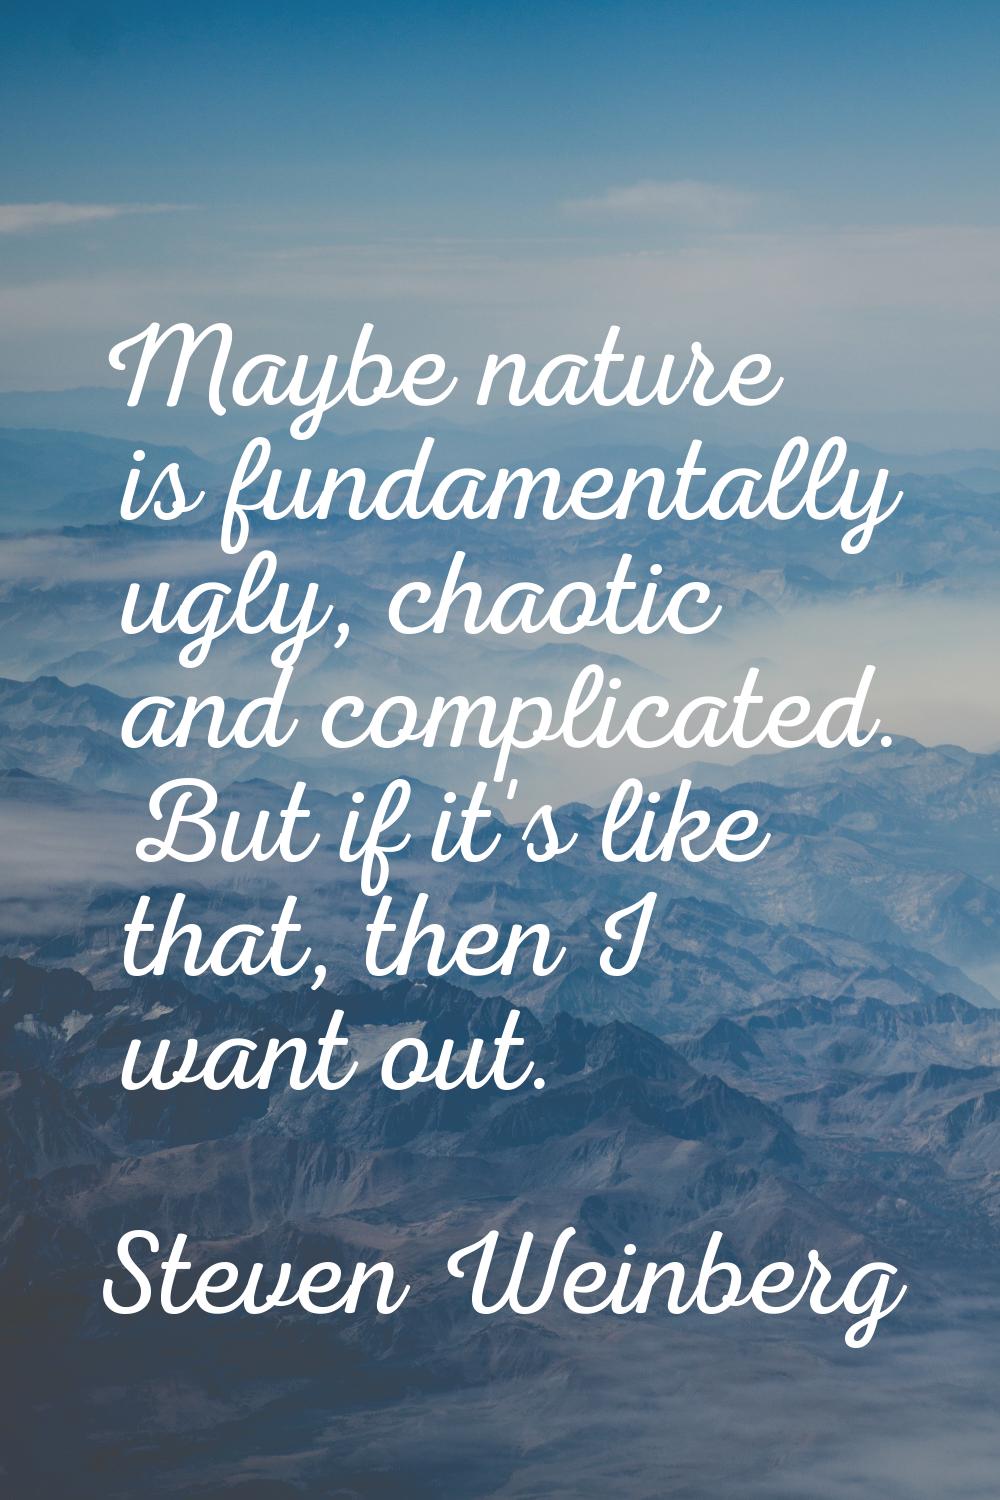 Maybe nature is fundamentally ugly, chaotic and complicated. But if it's like that, then I want out